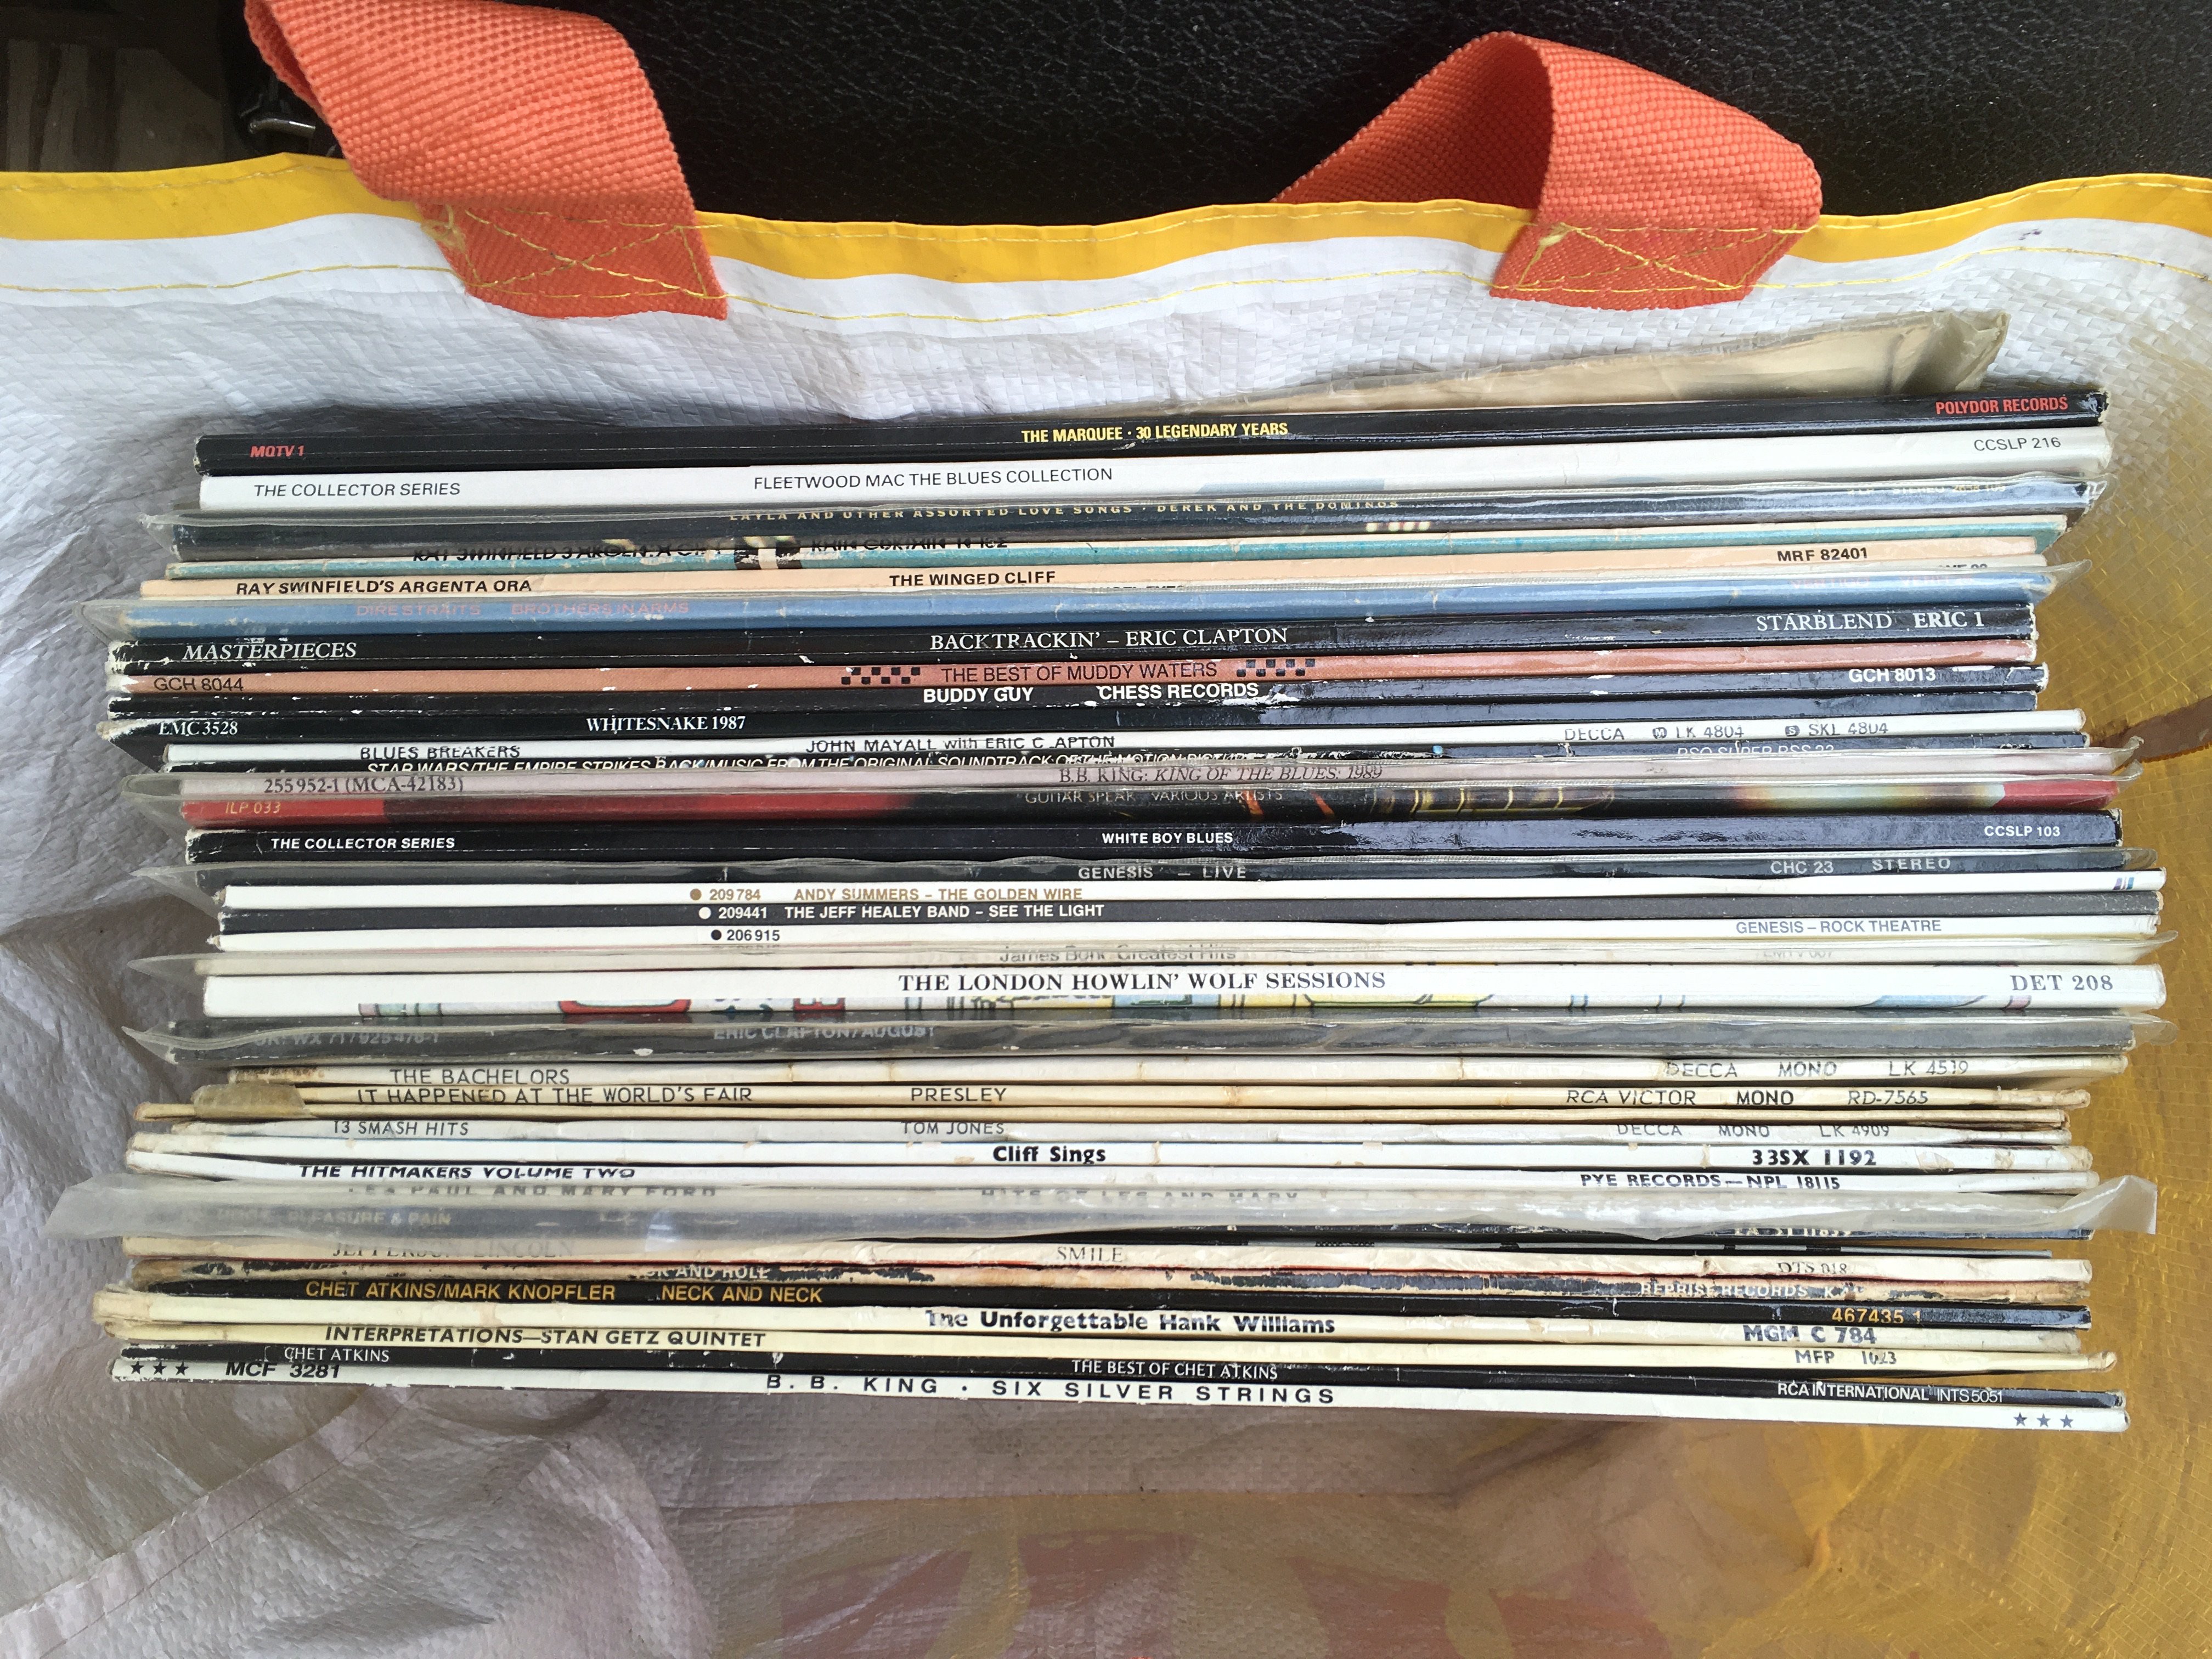 A collection of LPs by various artists including M